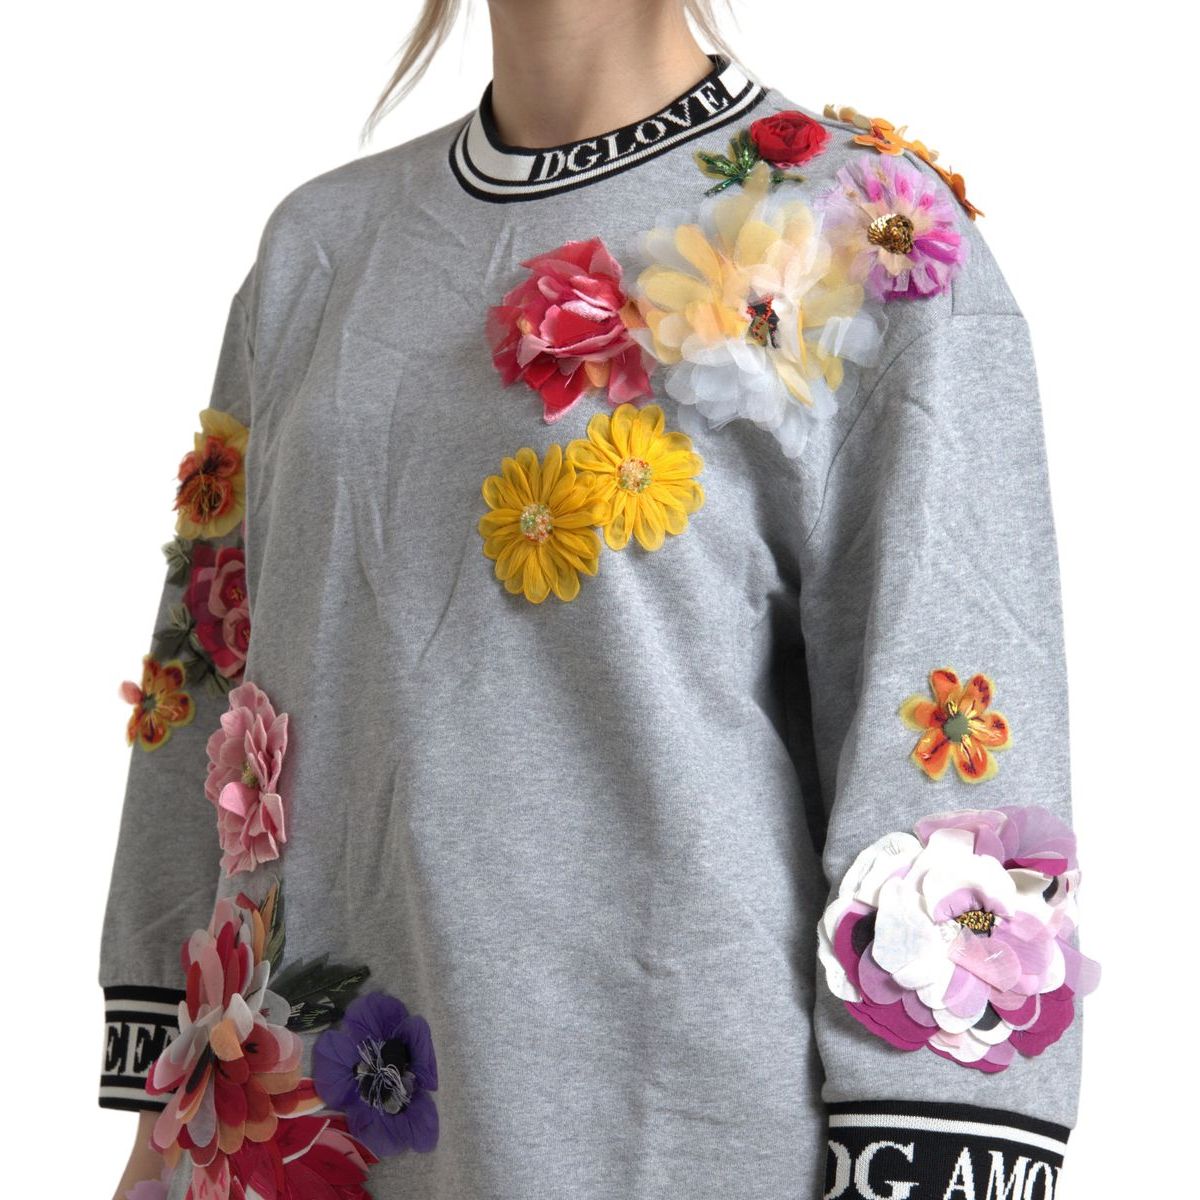 Dolce & Gabbana Chic Embellished Crew Neck Pullover Sweater gray-dg-amore-queen-floral-pullover-sweater